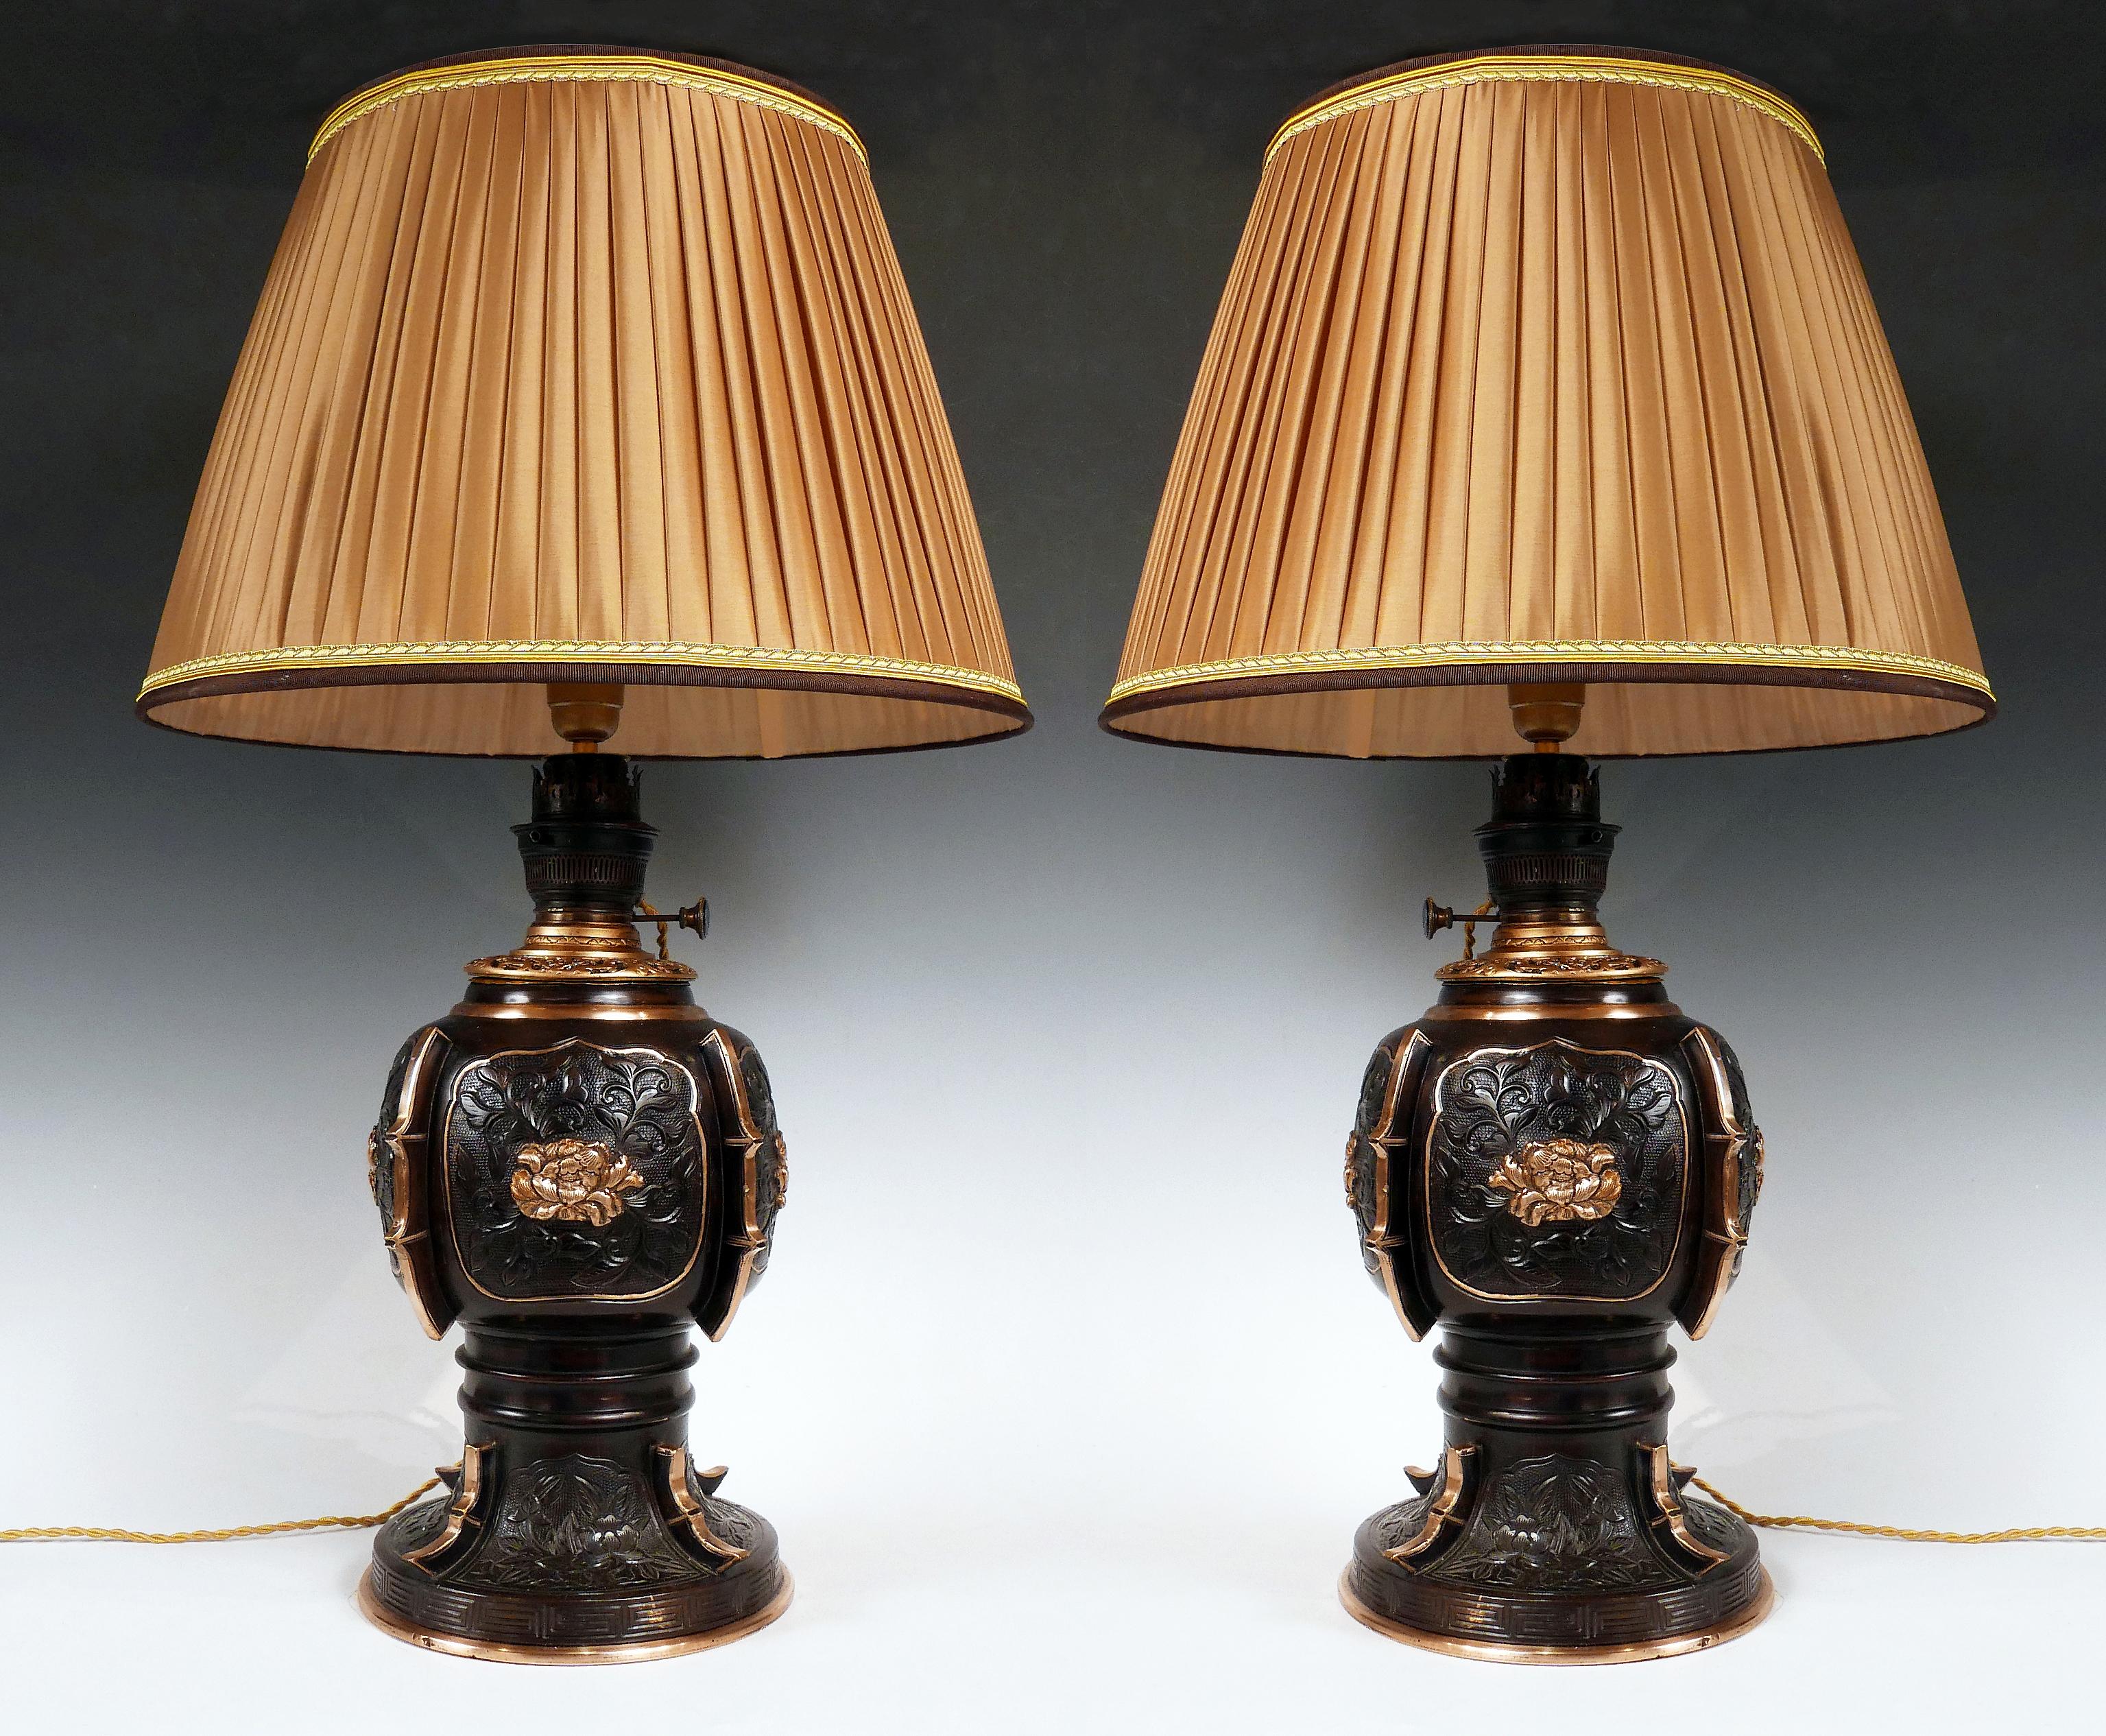 Height with lampshade : 73 cm (28,7 in.) ; Diameter lampshade : 44,5 cm (17,5 in.) ; 
Diameter base : 22 cm (8,6 in.)
Beautiful pair of patinated and gilded bronze China vases mounted as lamps, decorated with flowers and foliage in cartouches.